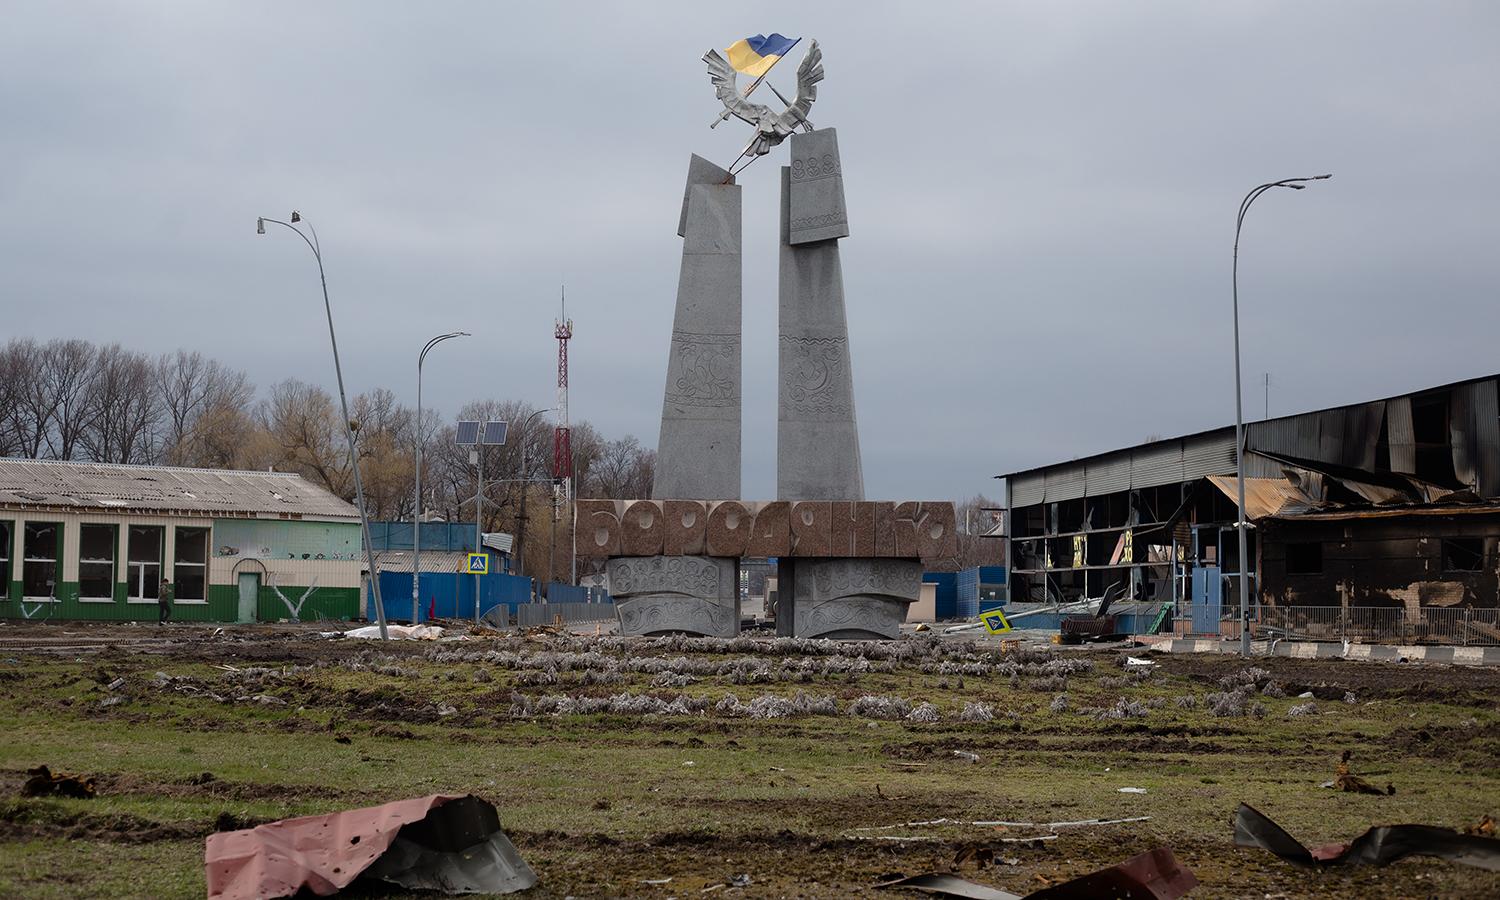 Microsoft said on its blog that it disrupted phishing sites used by Russian intelligence to target Ukraine. Pictured: A view of a monument at the entrance to Borodianka, Ukraine, on April 5, 2022. (Photo by Anastasia Vlasova/Getty Images)